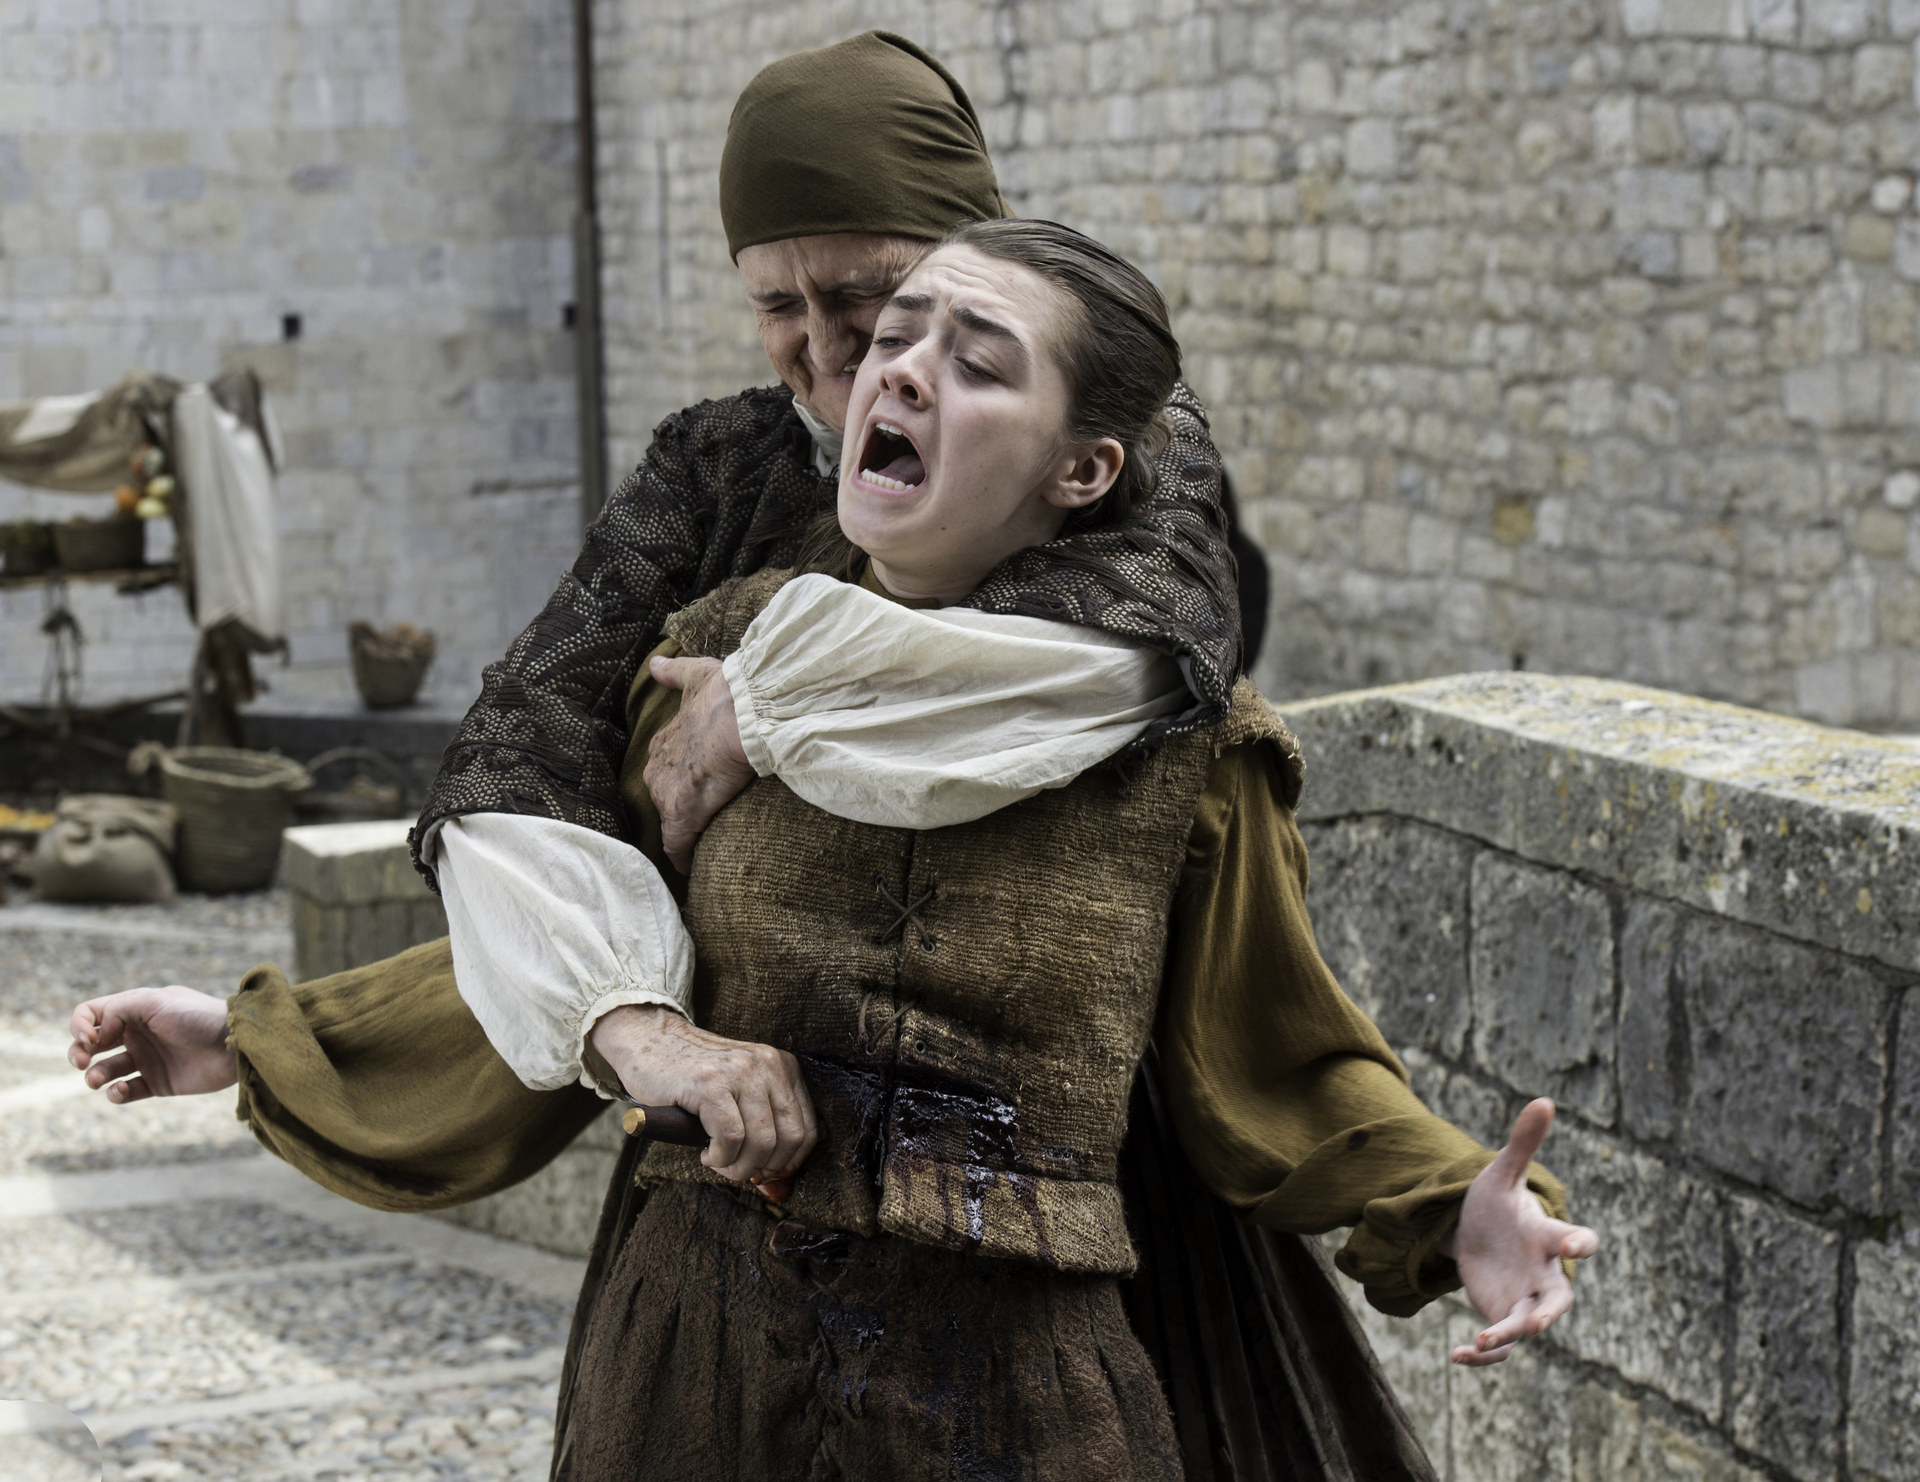 maisie williams being stabbed in &quot;game of thrones&quot;